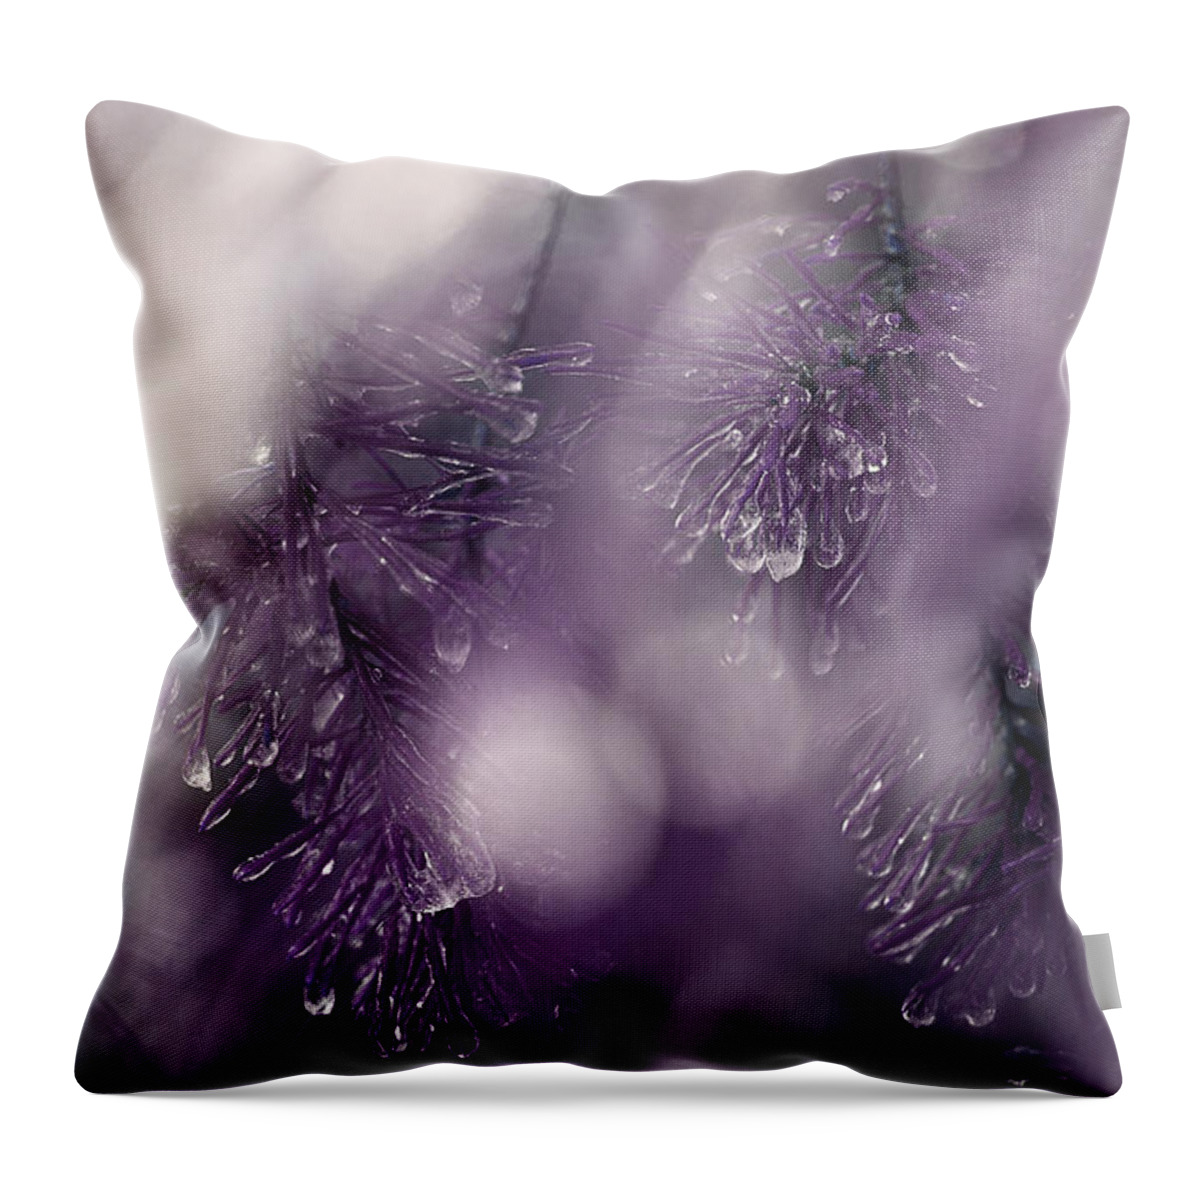 Pine Needles Throw Pillow featuring the photograph I Still Search For You #1 by Michael Eingle